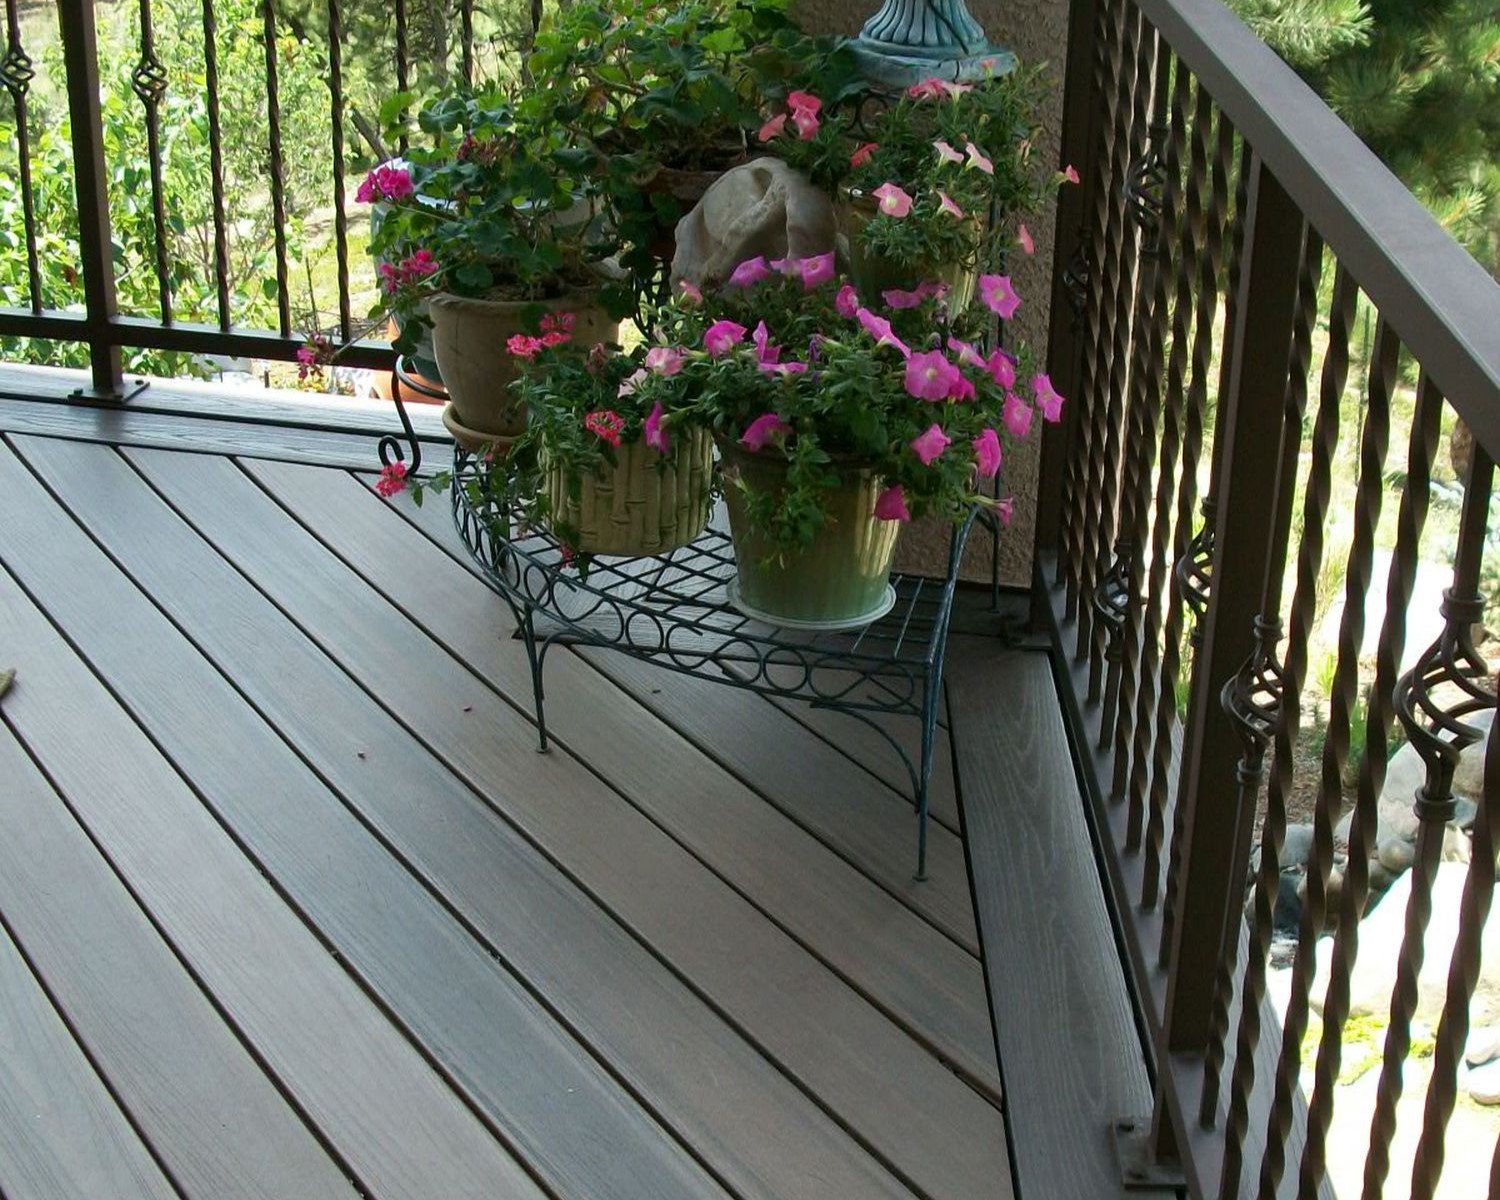 Composite deck with a double picture frame border. A metal panel railing with twisted, basket design balusters.